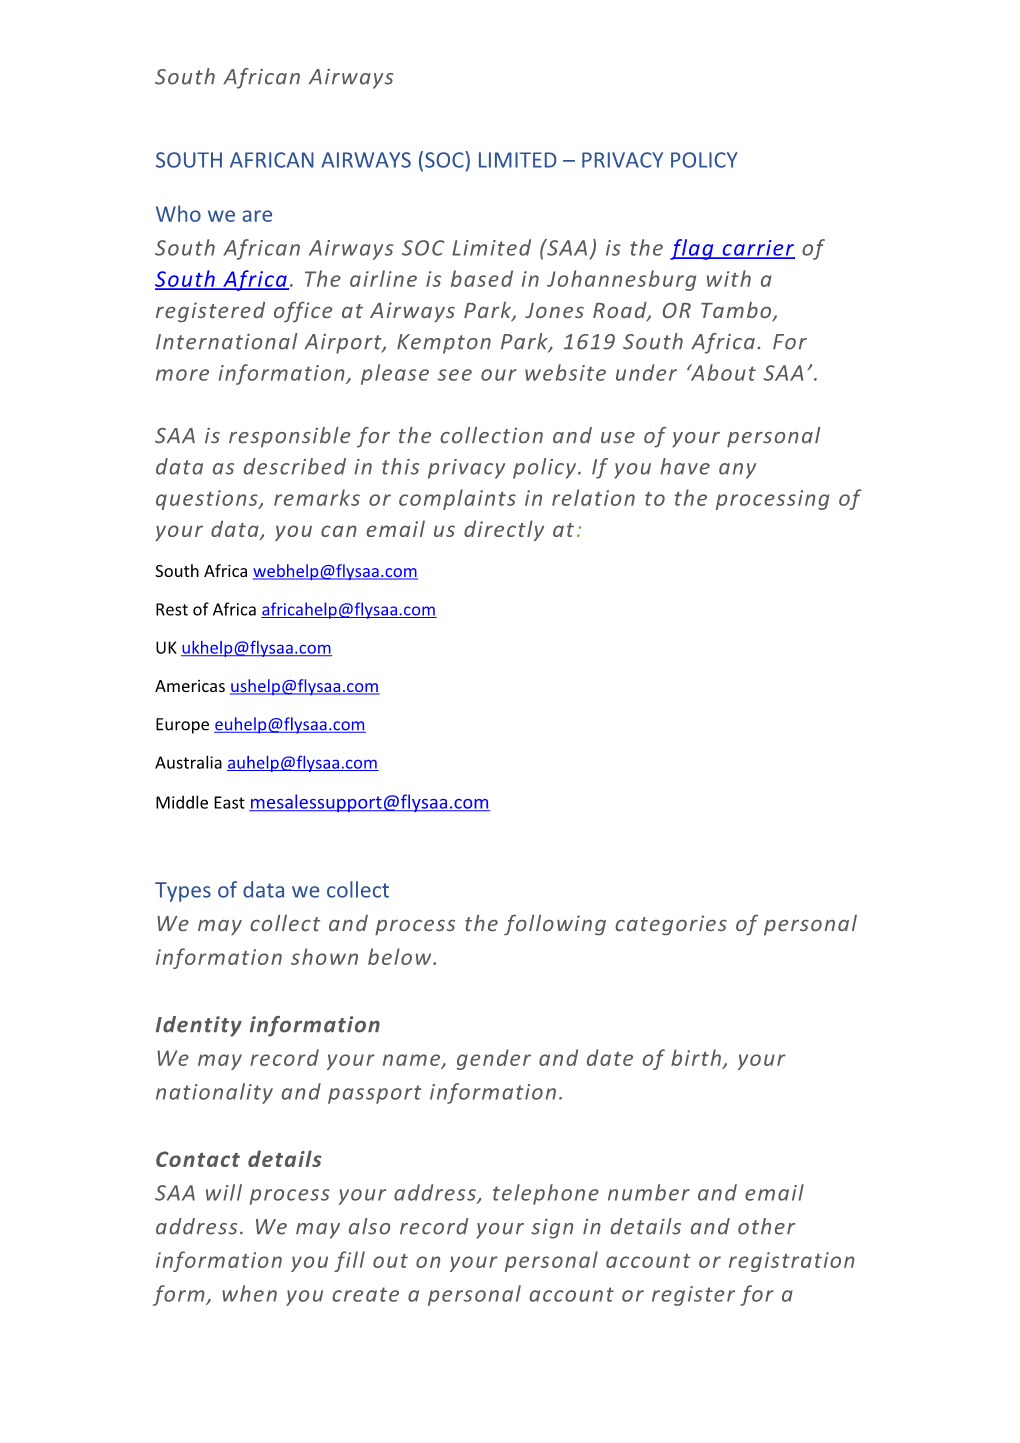 South African Airways (Soc) Limited Privacy Policy